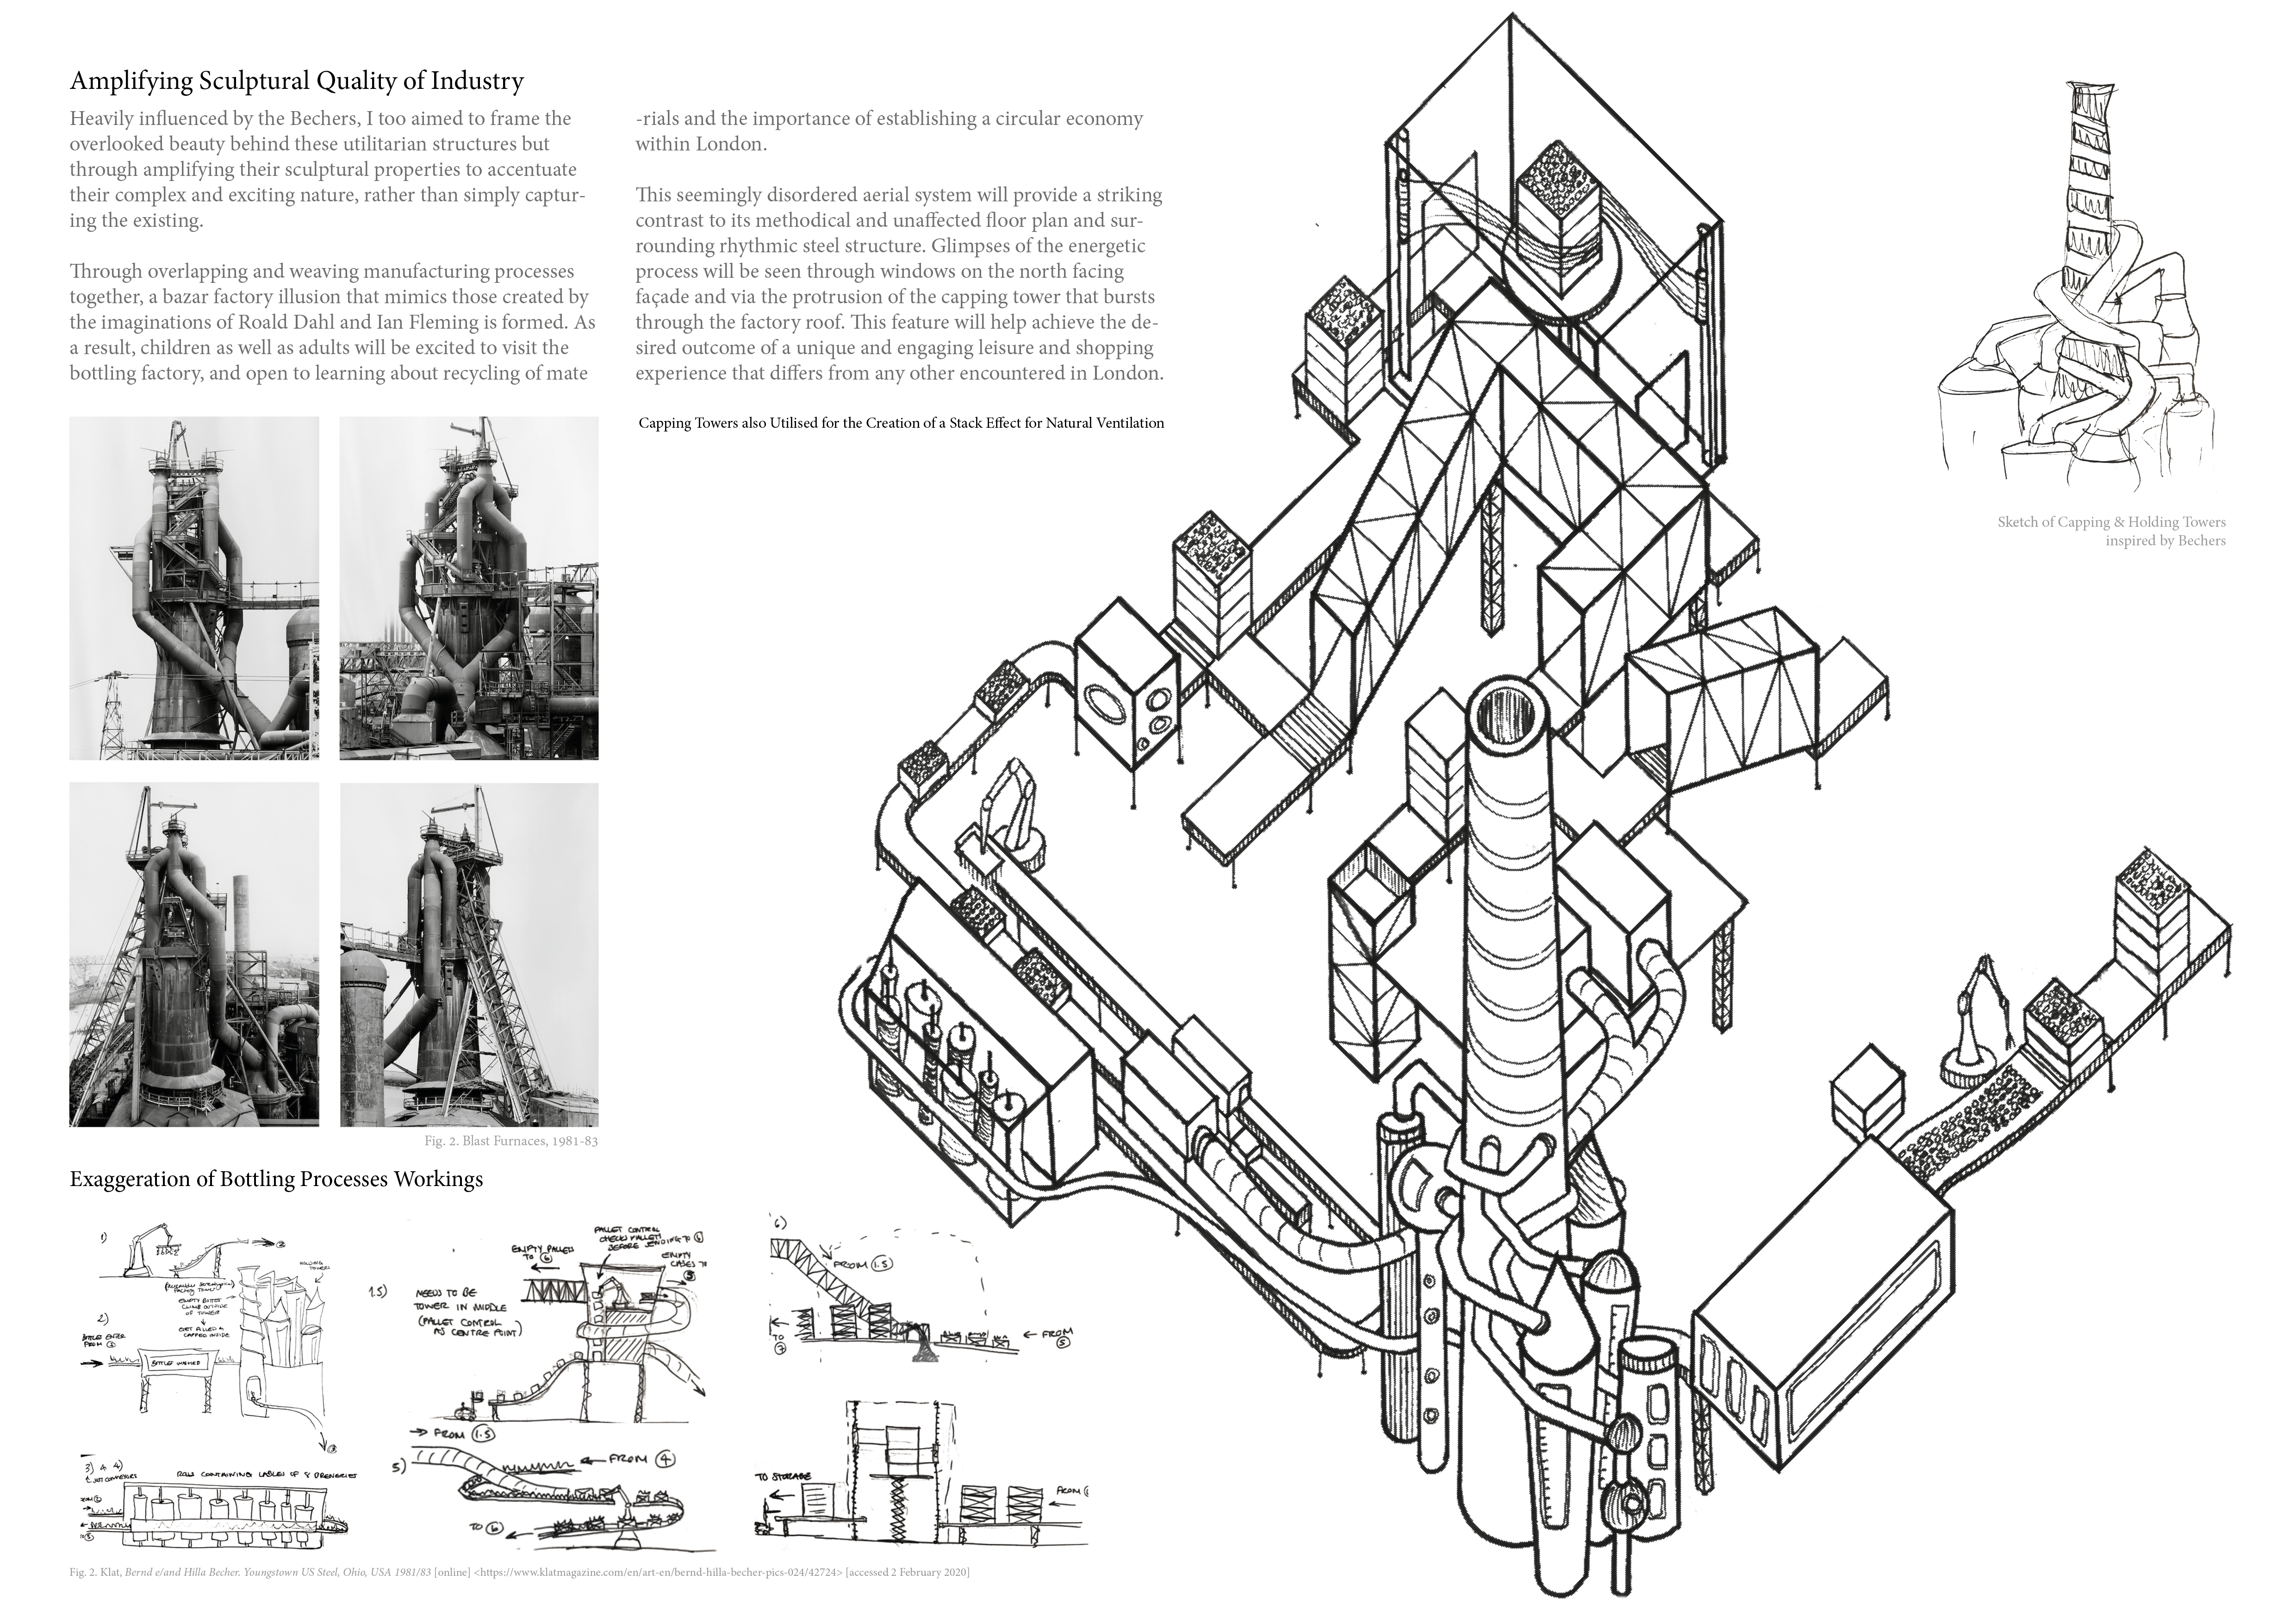 portfolio page three shows a willy-wonka style drawing of the machinery being used in the bottling factory